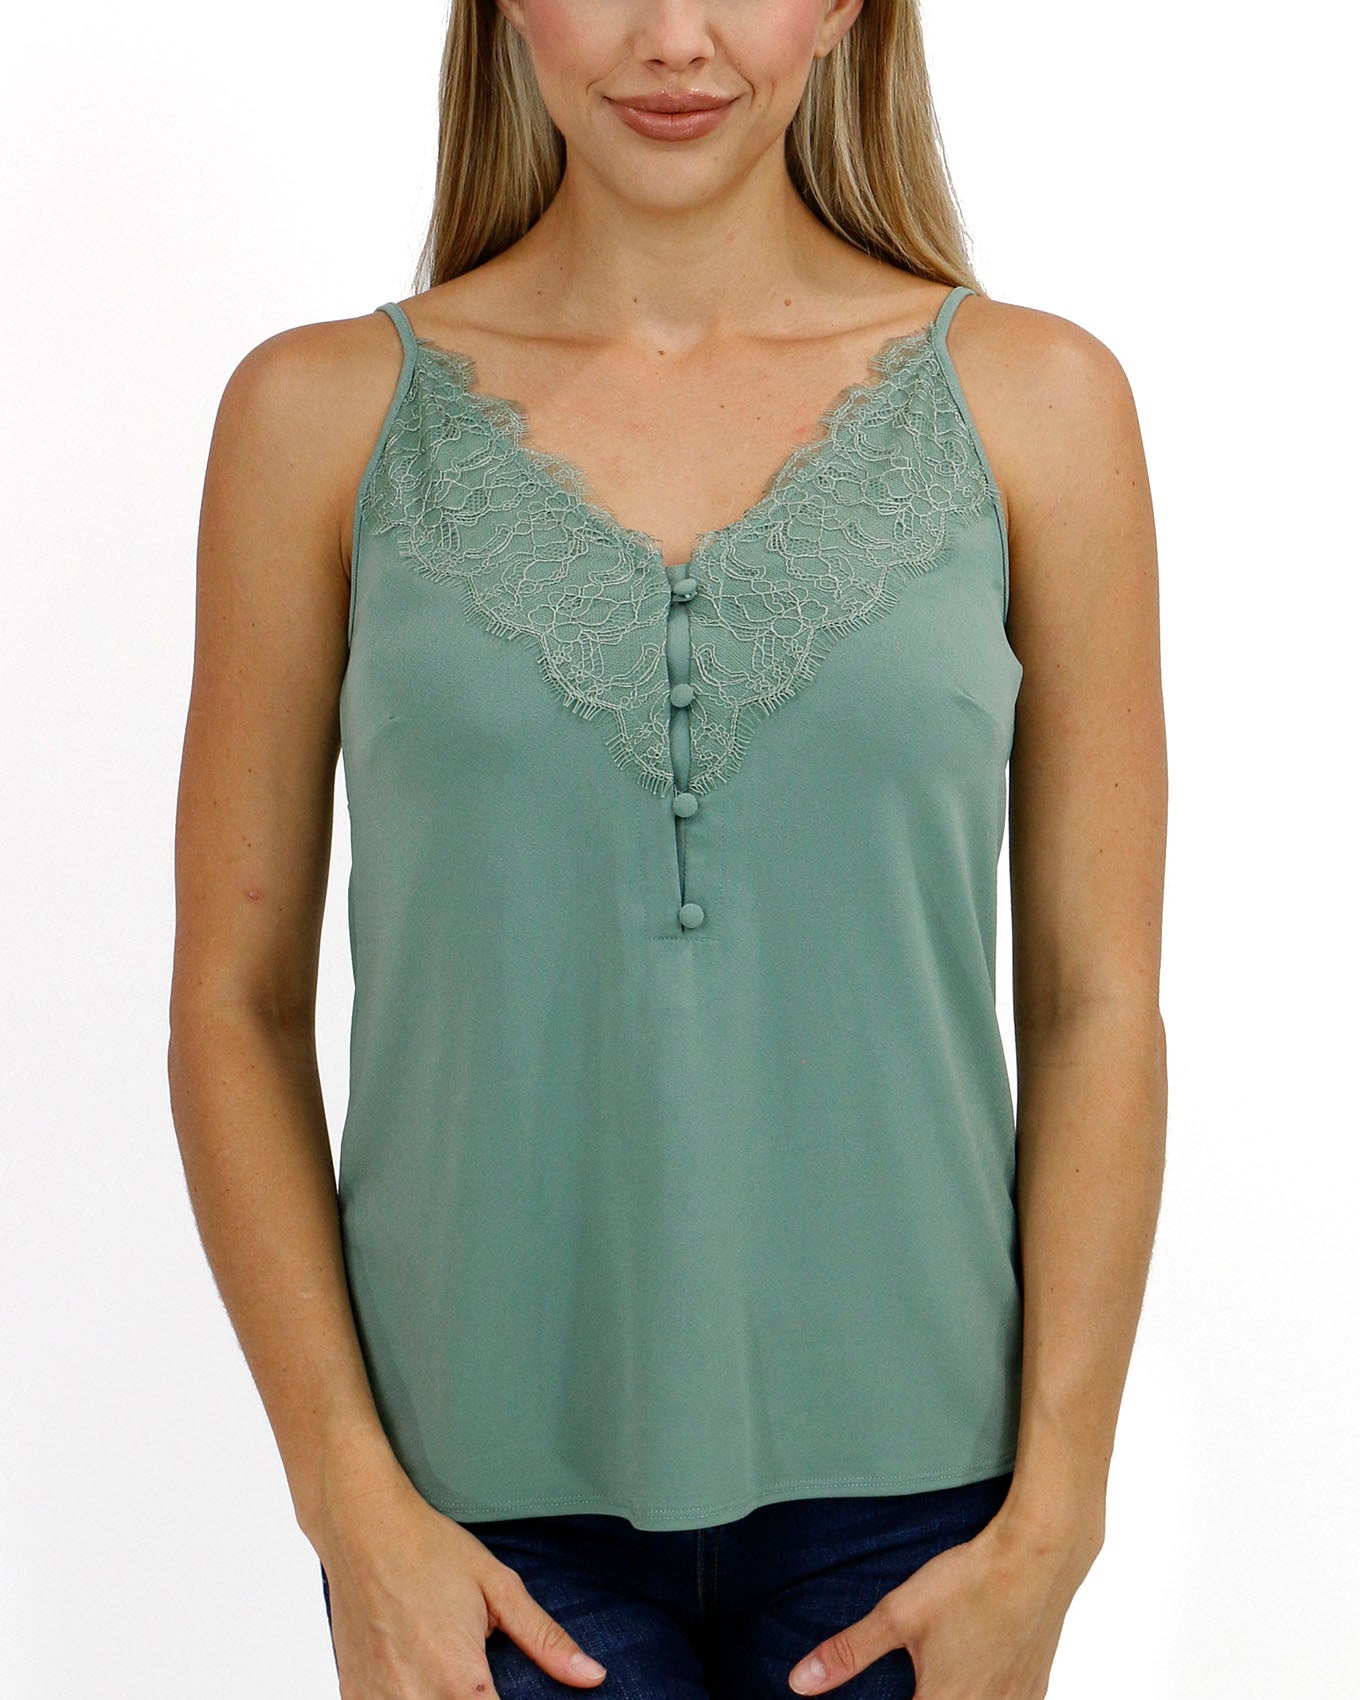 Camisole Top with Lace